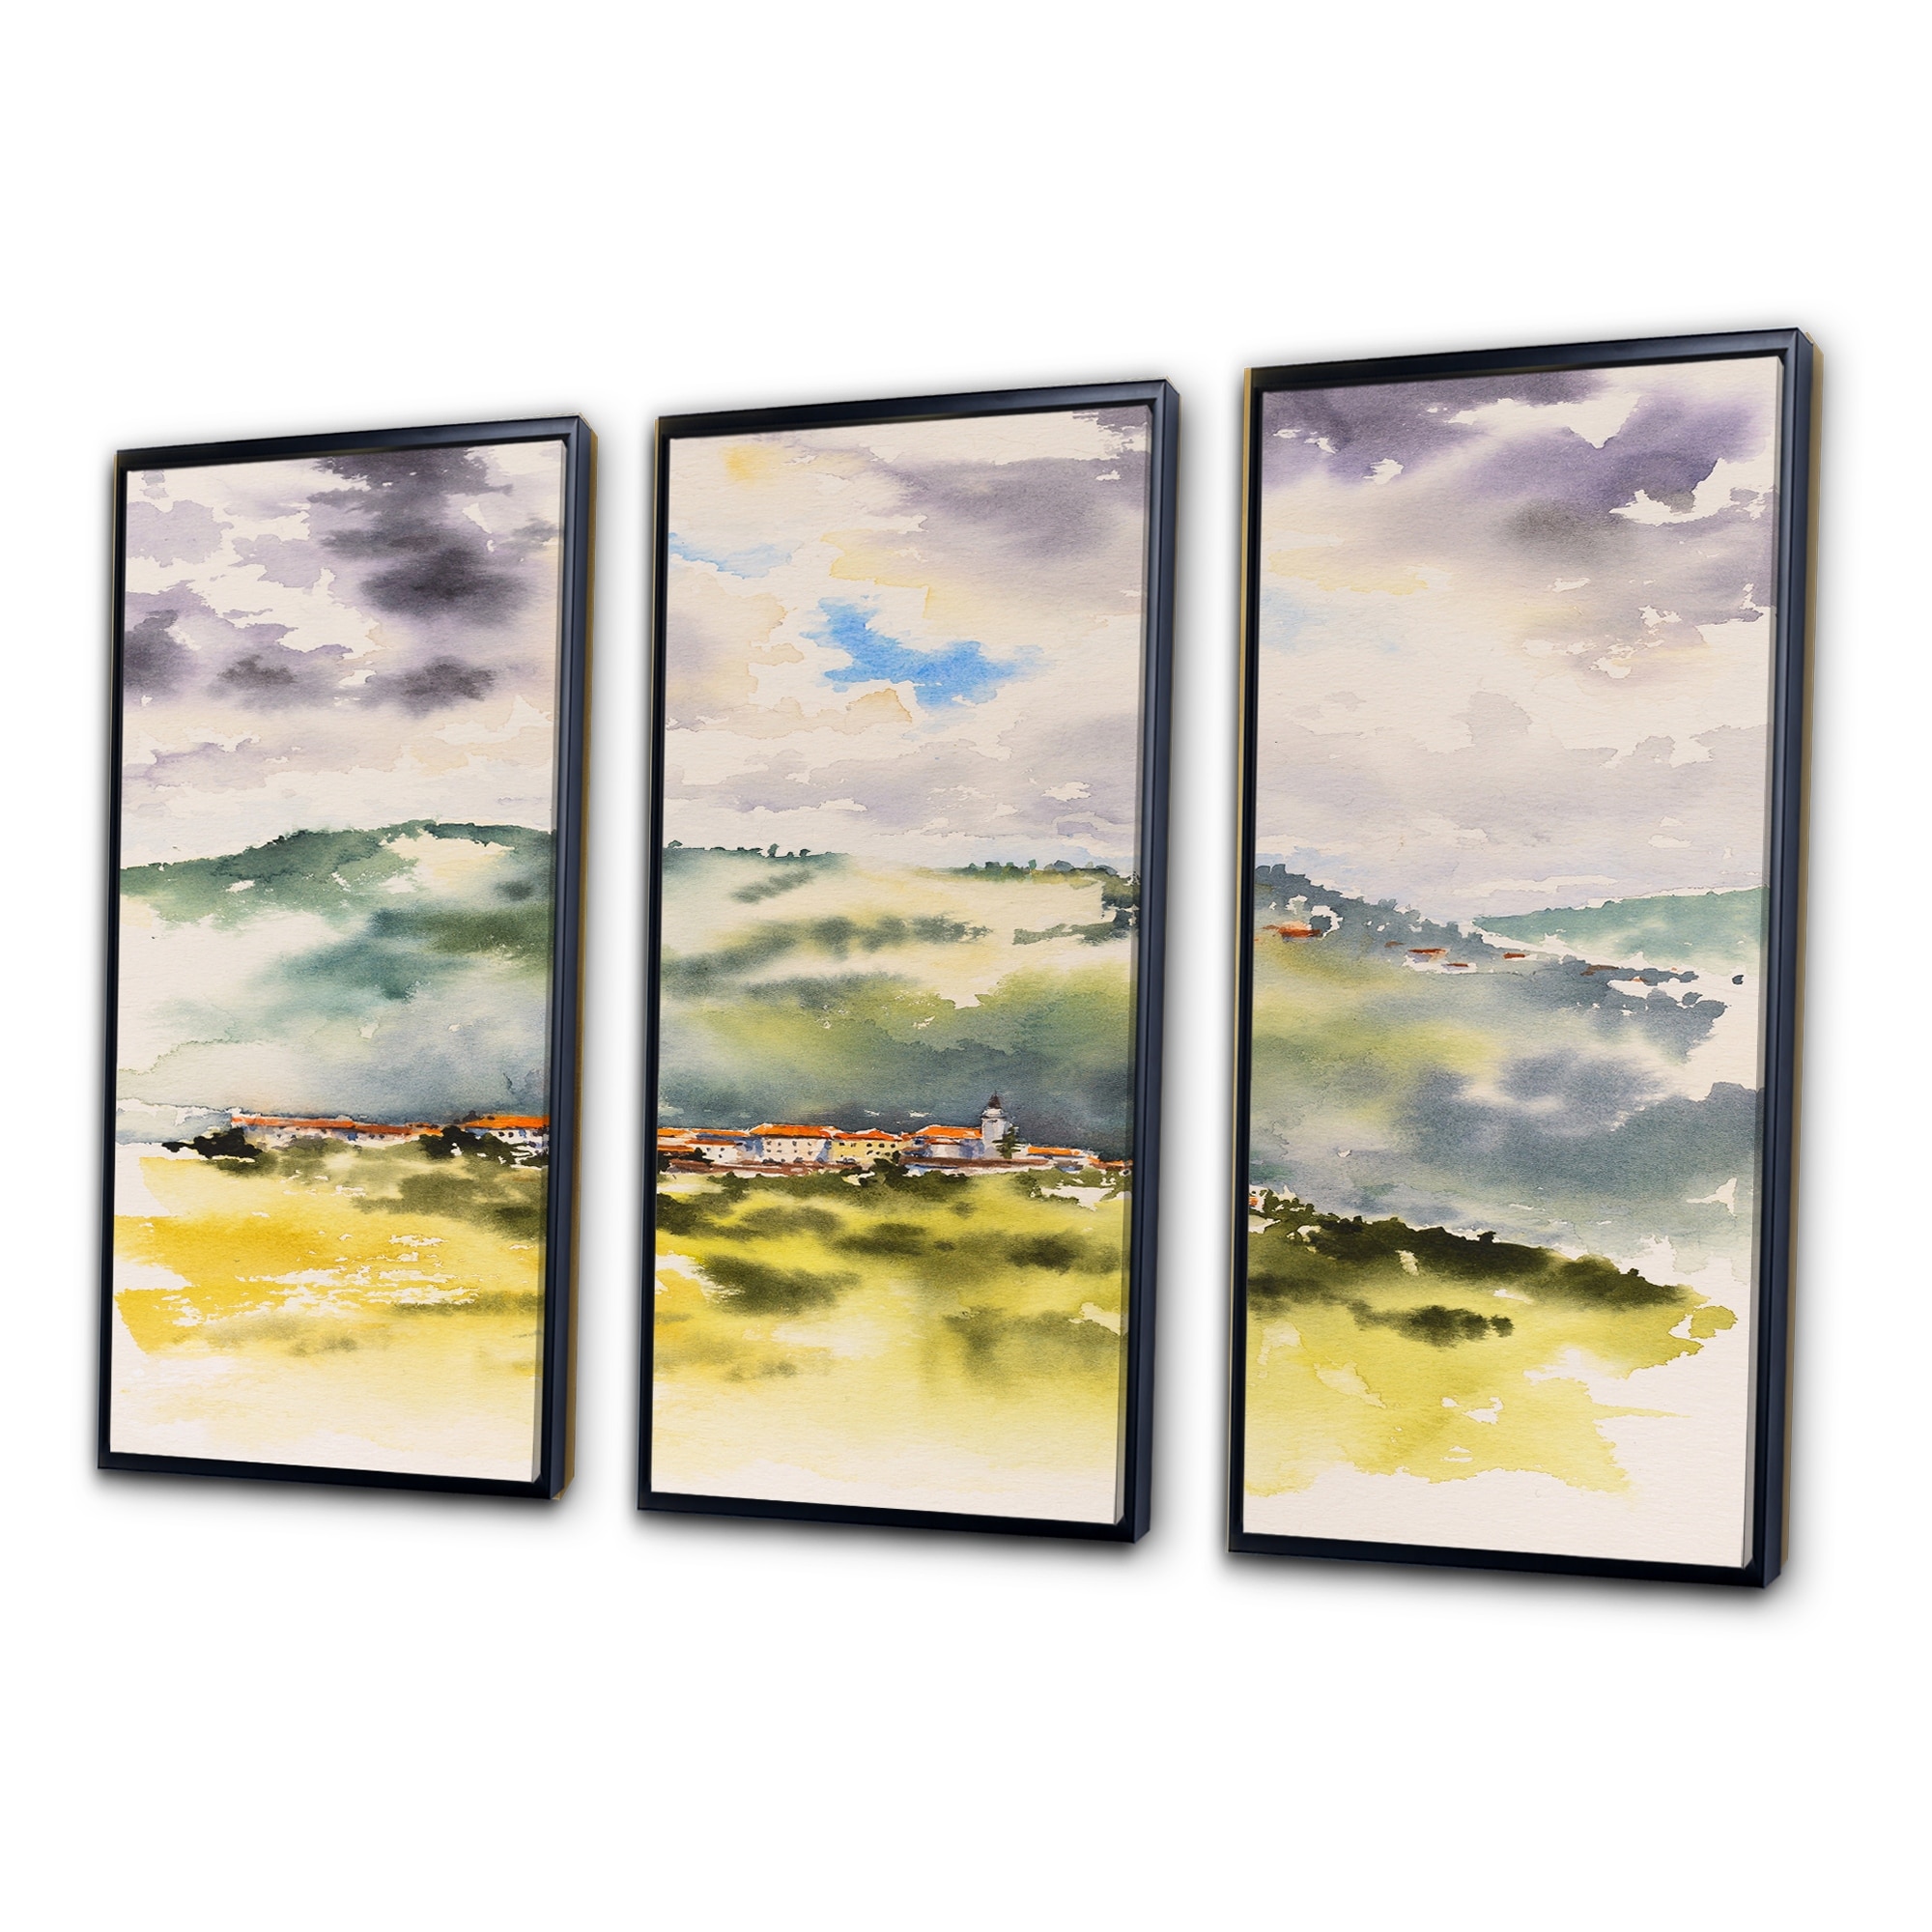 Designart "Vintage Little Mountain Town" French Country Framed Art Set of 3 - 4 Colors of Frames